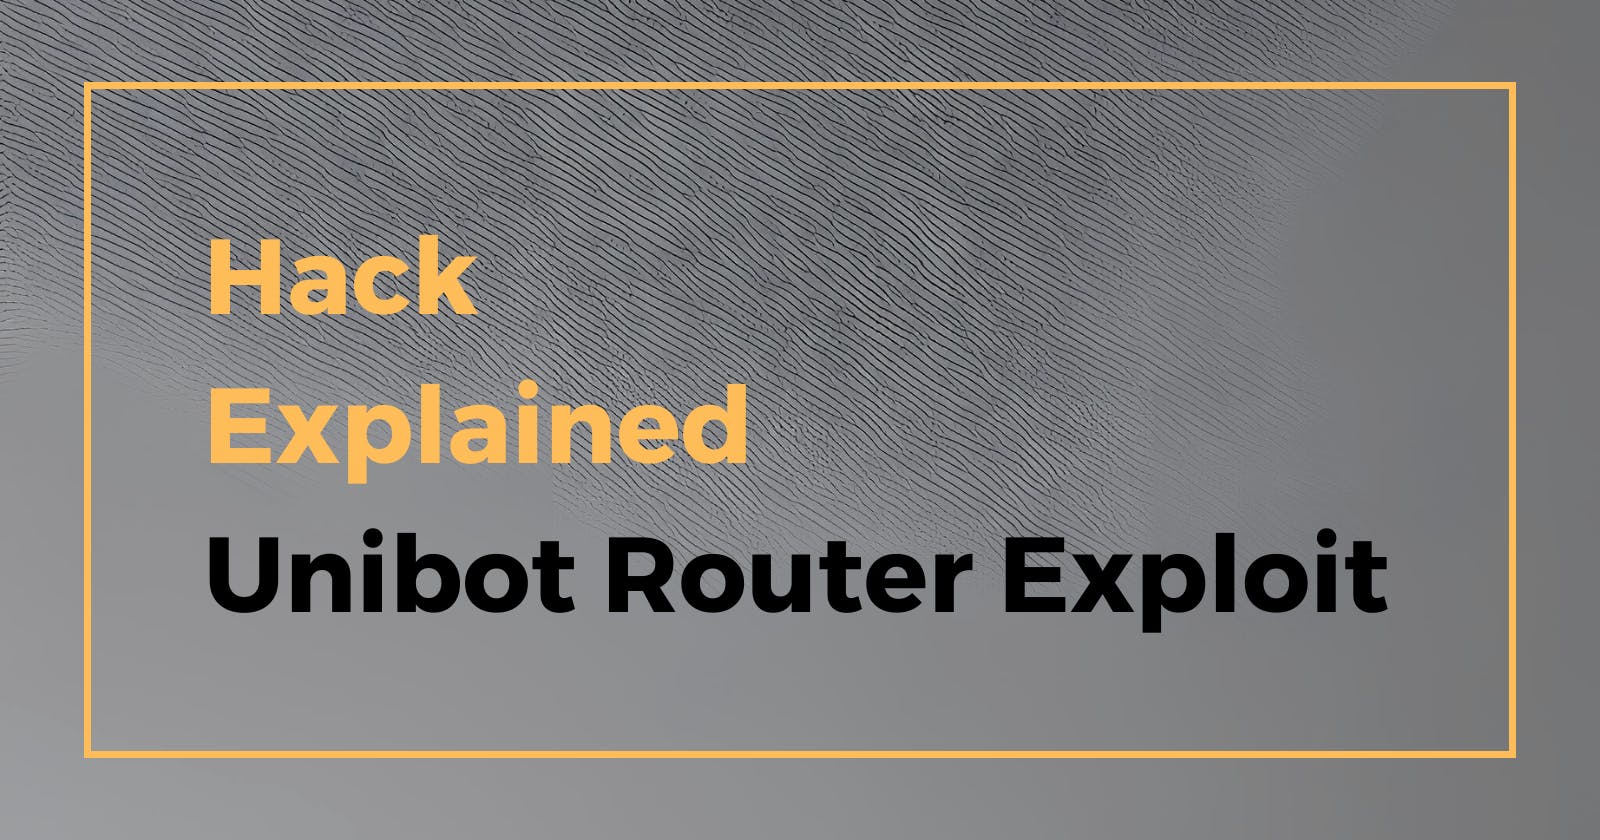 Unibot Suffers $640k Loss in Router Exploit